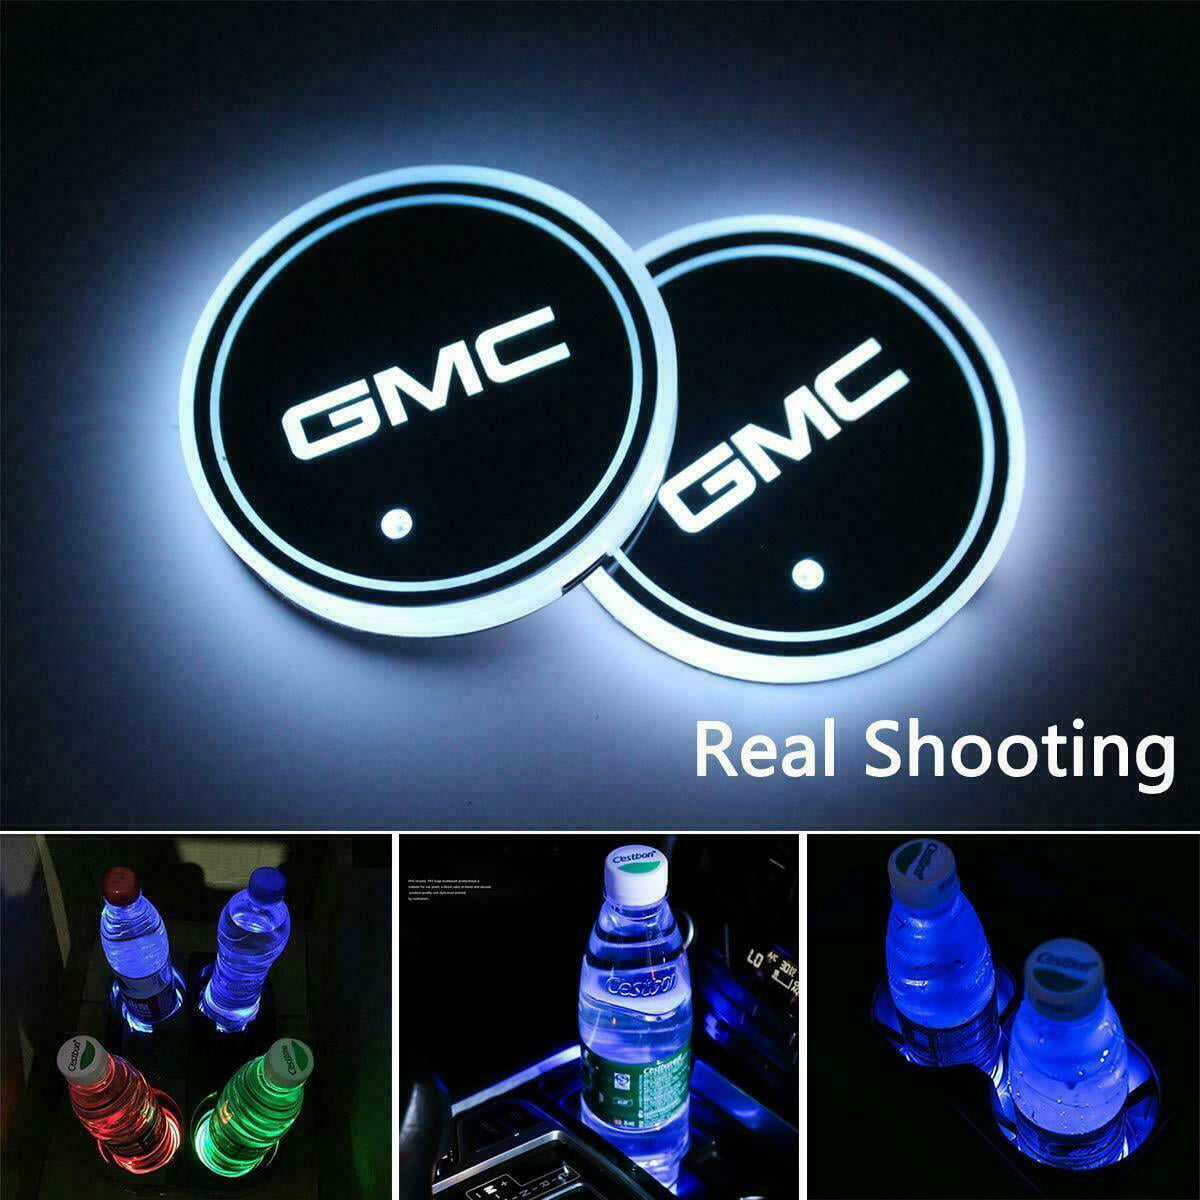 LED Interior Car Ambient Lights with 7 Colors Changing USB Charging-Cool Car Accessories Car Cup Holder Coasters 2 pack 